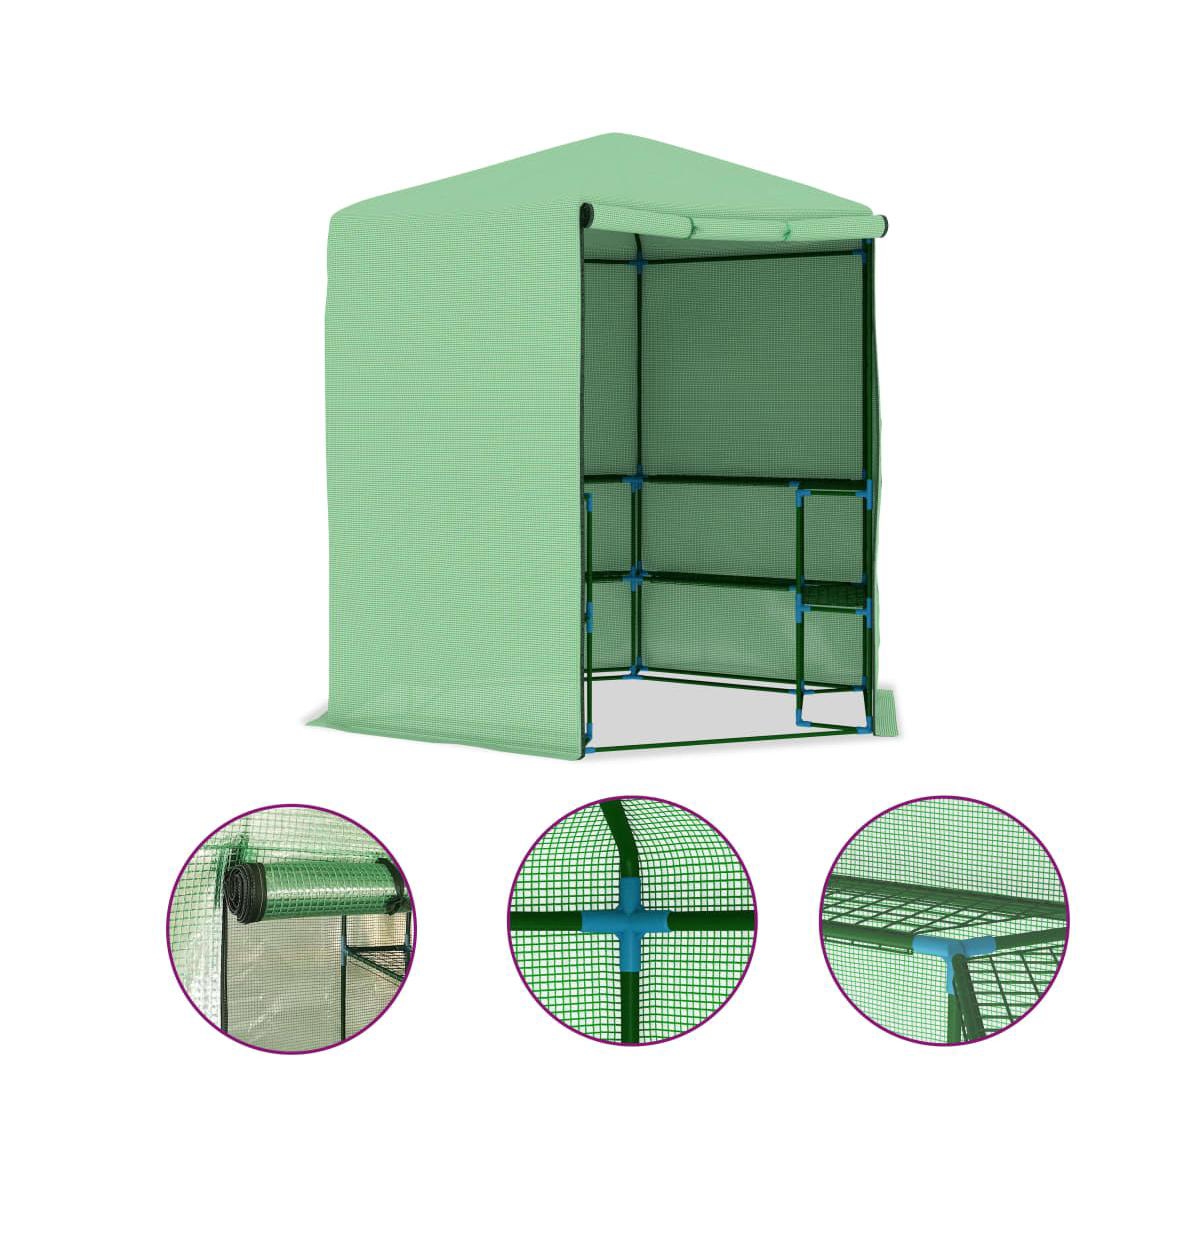 Greenhouse with Shelves Steel 89.4"x87.8" - Green